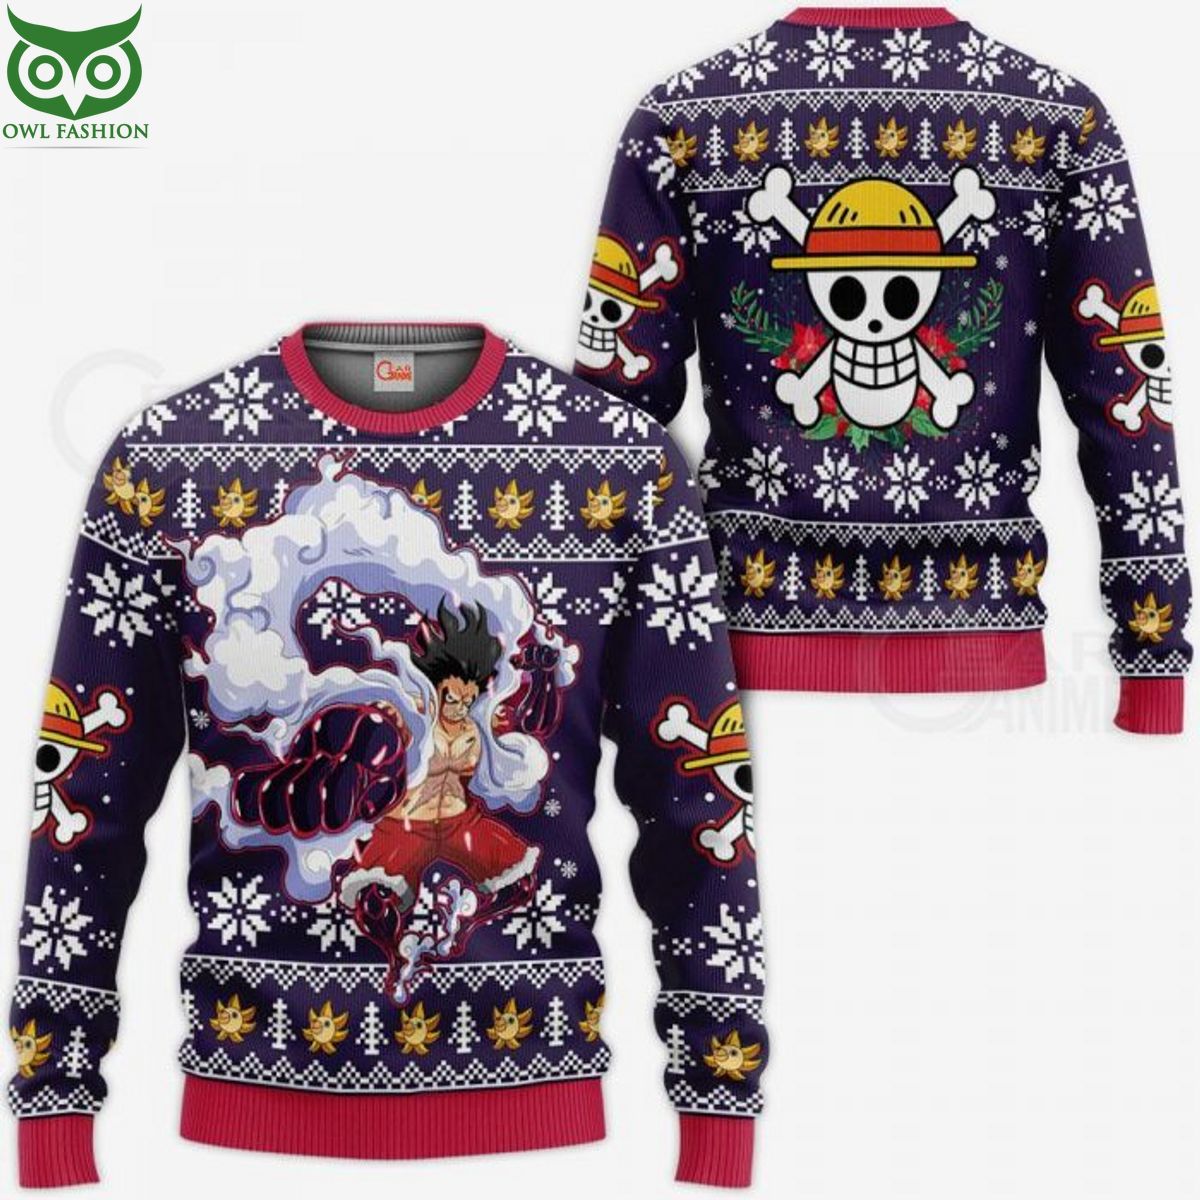 onepiece luffy gear 4 limited ugly sweater jumper 1 Yx0fQ.jpg